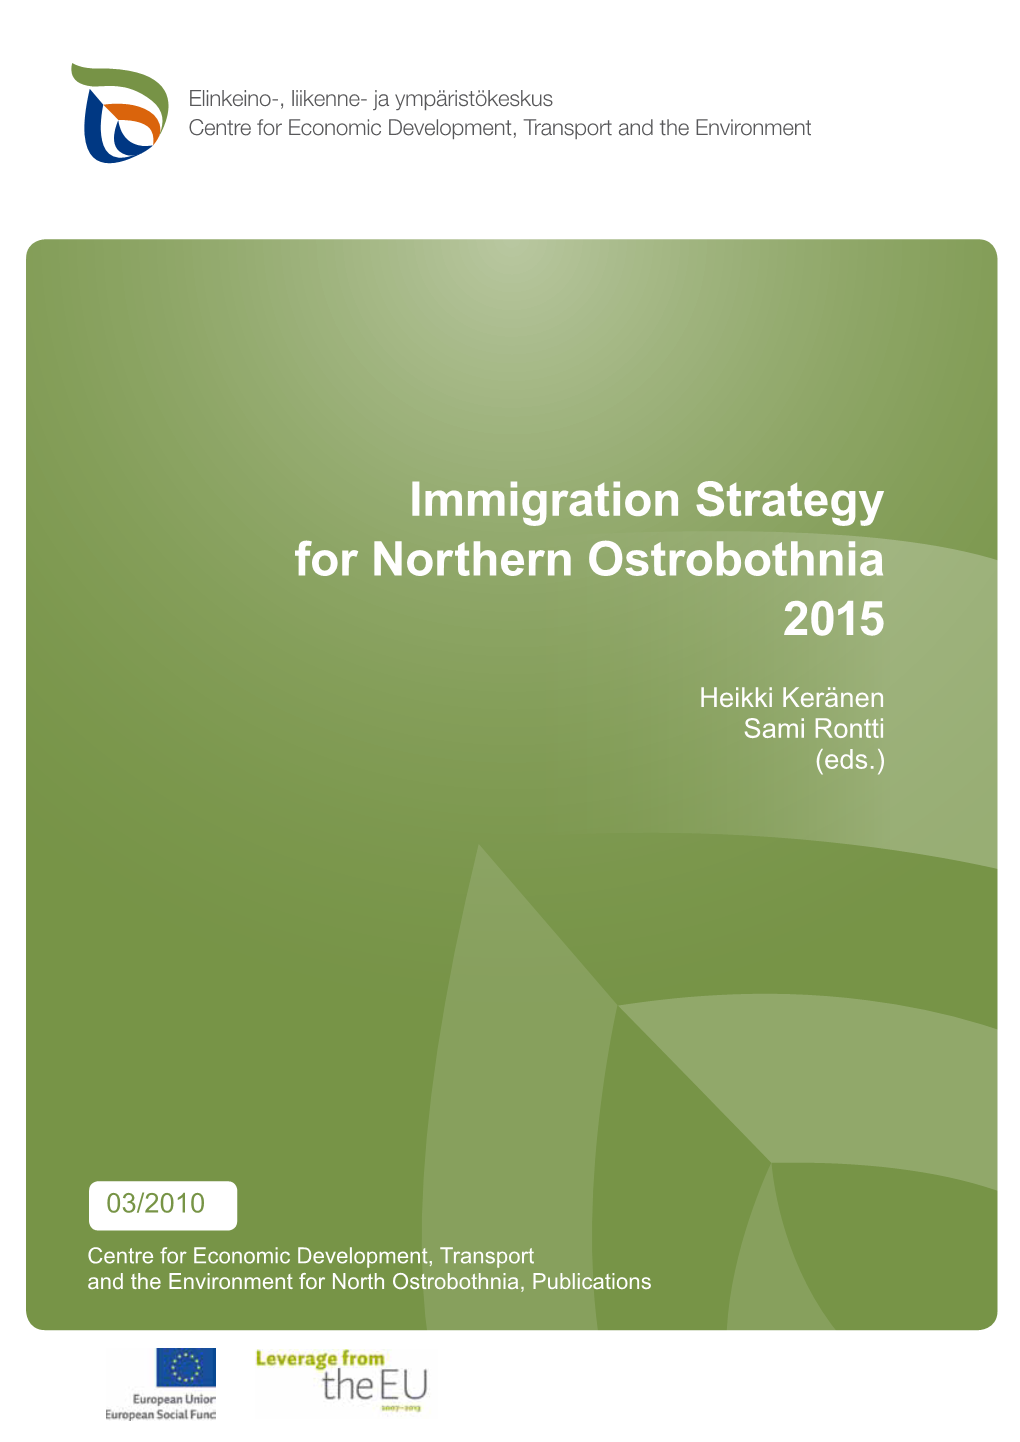 Immigration Strategy for Northern Ostrobothnia 2015